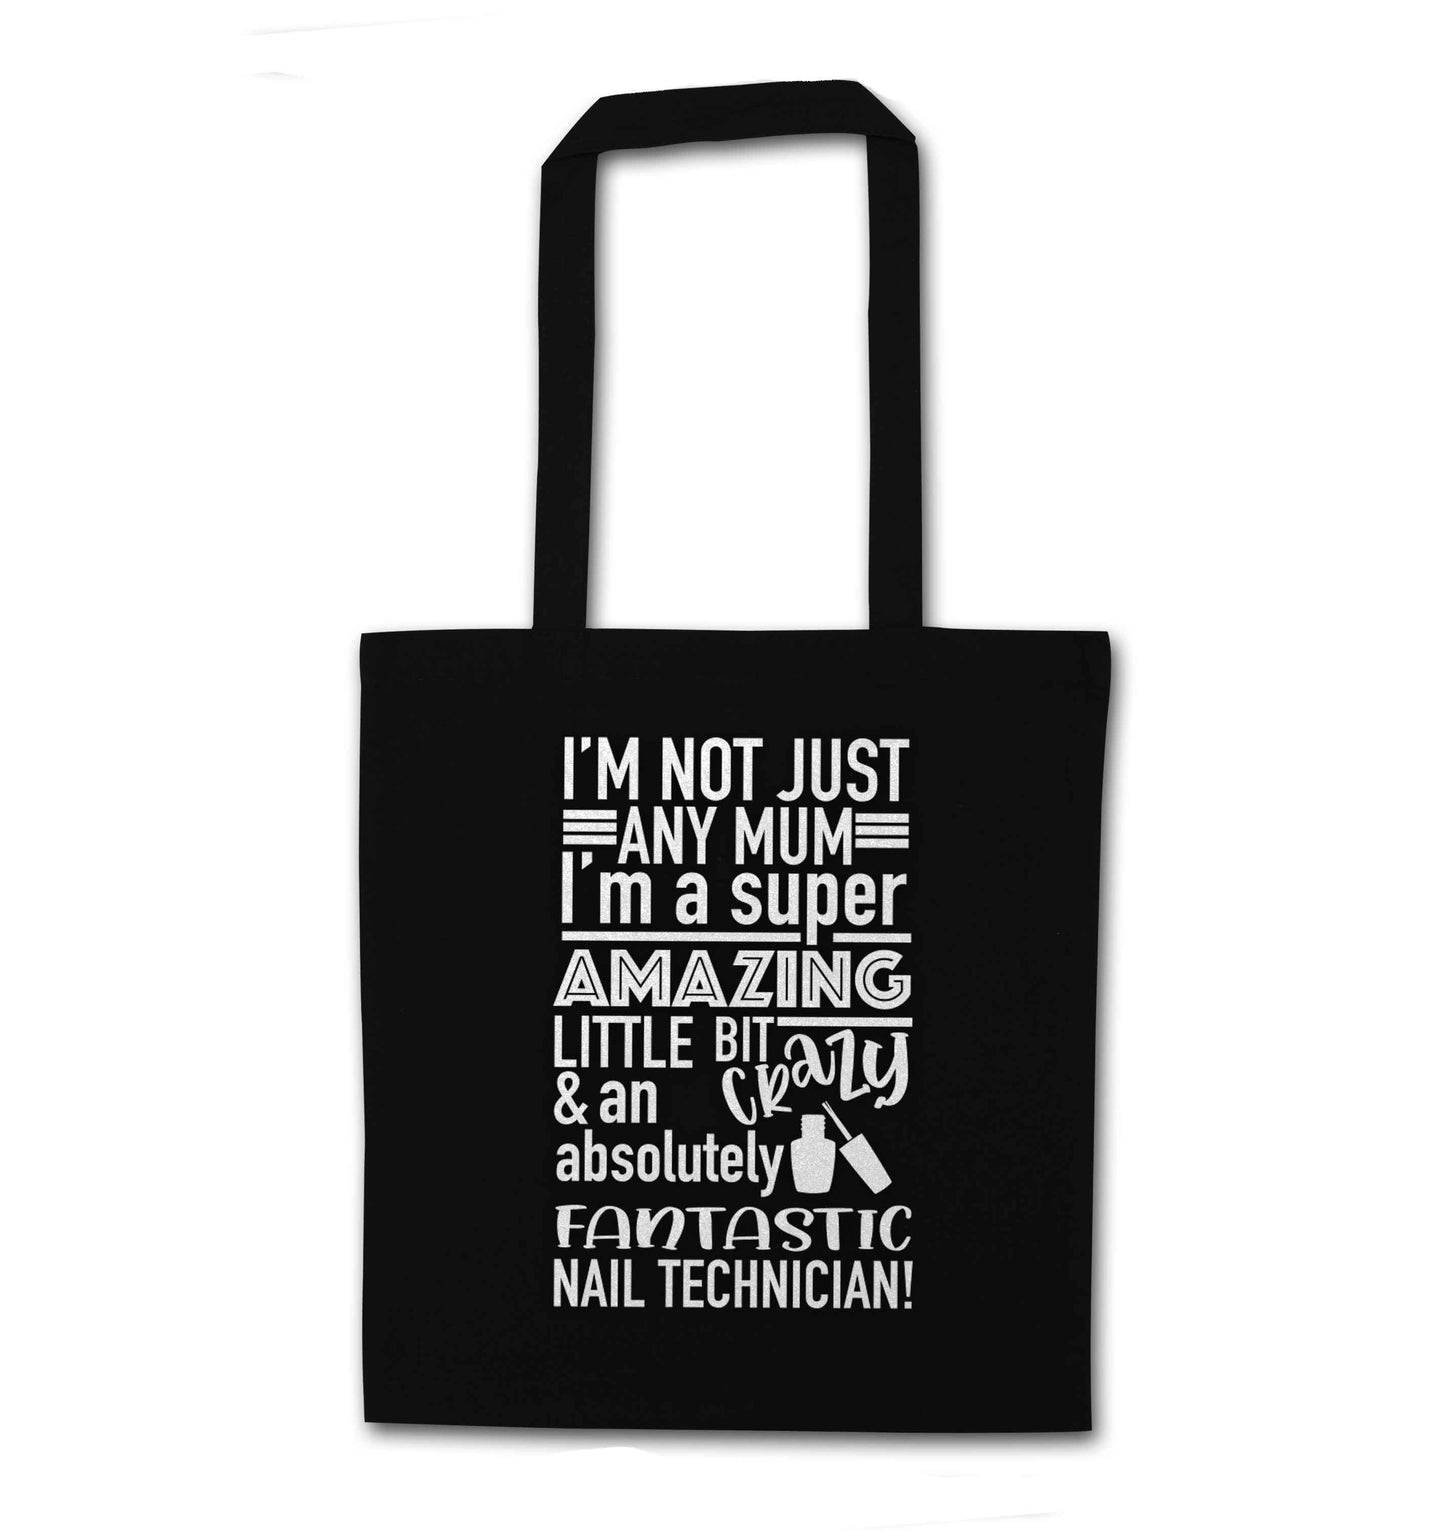 I'm not just any mum I'm a super amazing little bit crazy and an absolutely fantastic nail technician! black tote bag